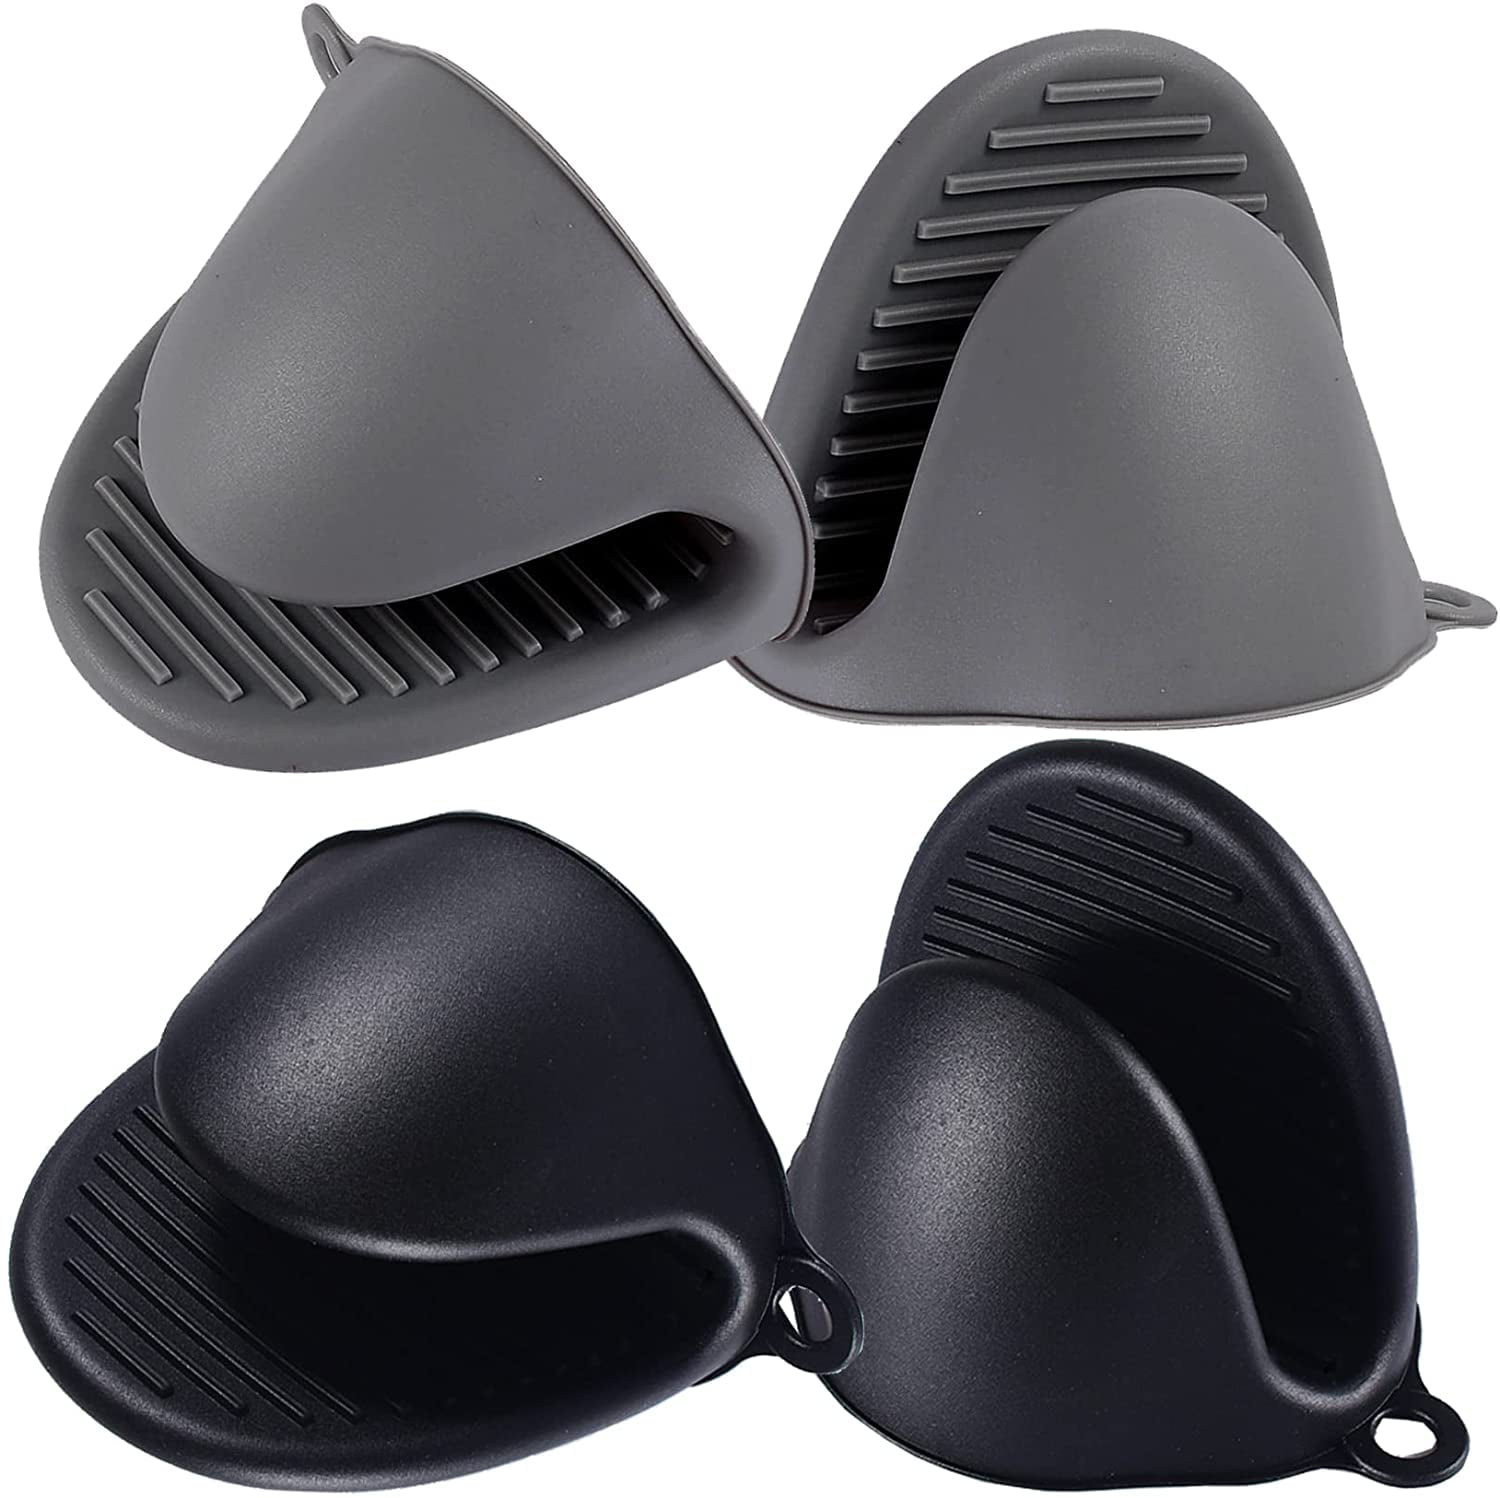 Viiwii Silicone Oven Mitts and Pot Holder Set Black 4 Pcs